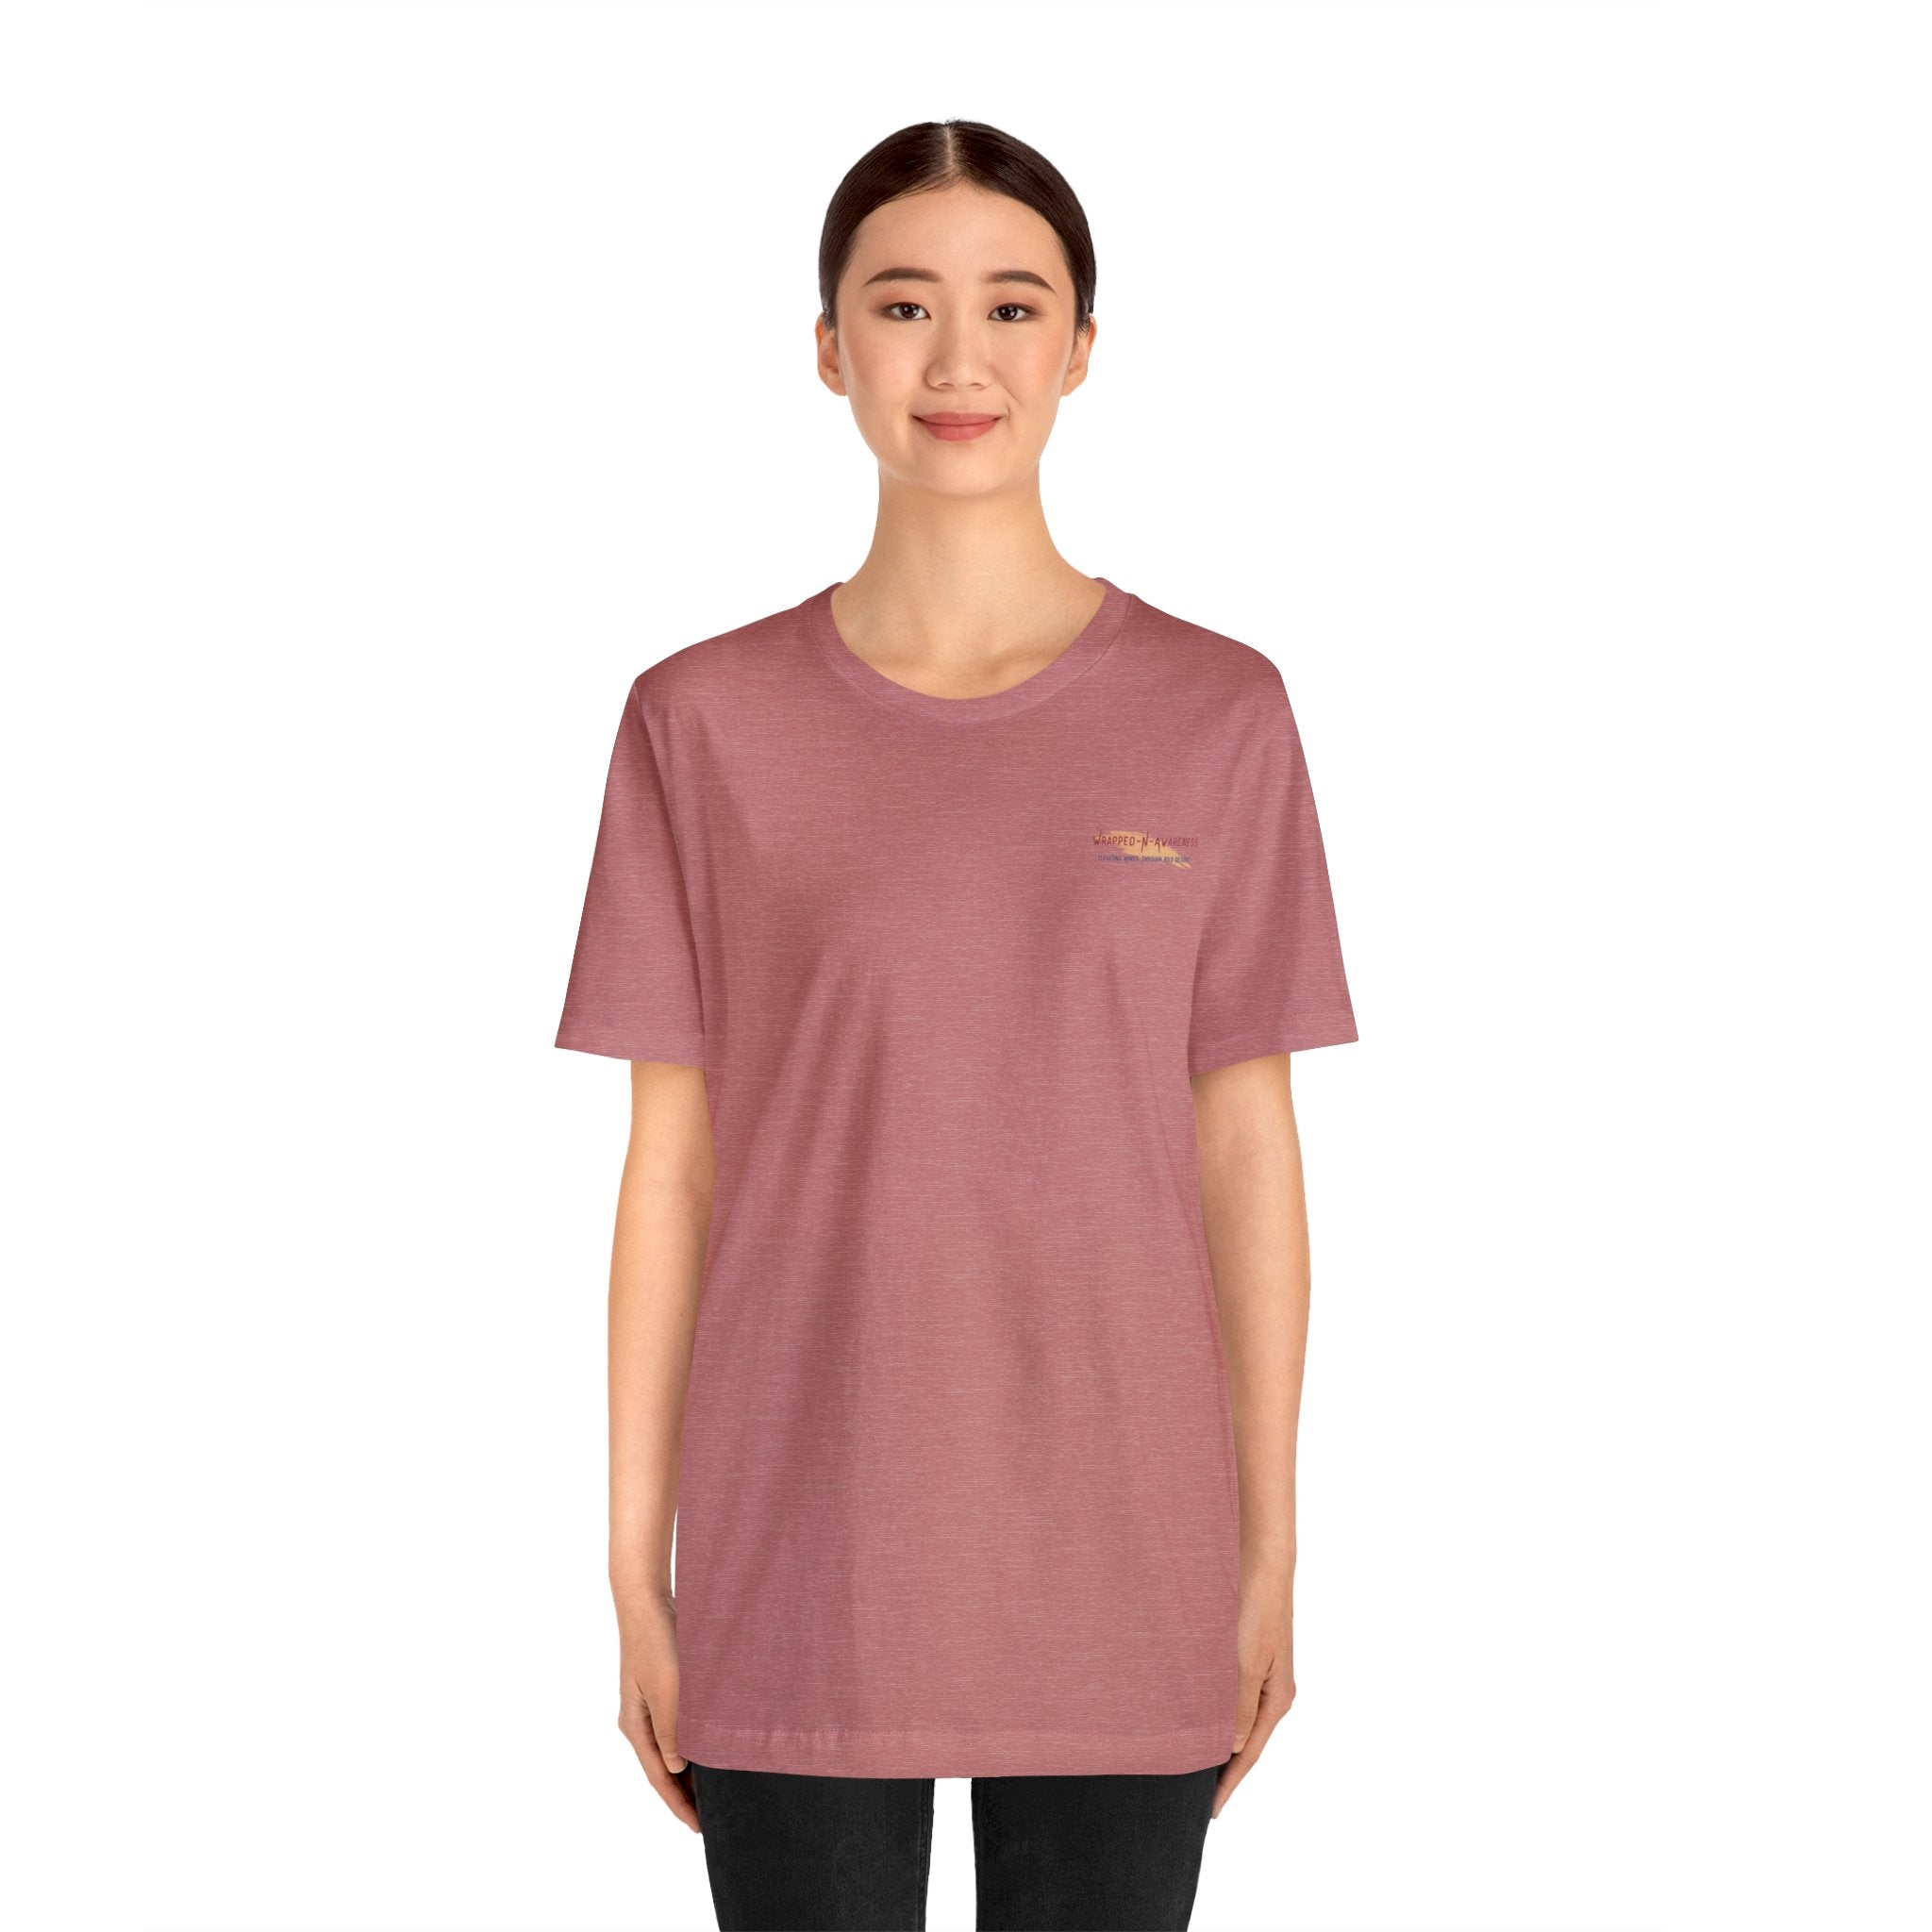 Release Your Mind Jersey Tee - Bella+Canvas 3001 Heather Mauve Airlume Cotton Bella+Canvas 3001 Crew Neckline Jersey Short Sleeve Lightweight Fabric Mental Health Support Retail Fit Tear-away Label Tee Unisex Tee T-Shirt 8726210493783855722_2048 Printify